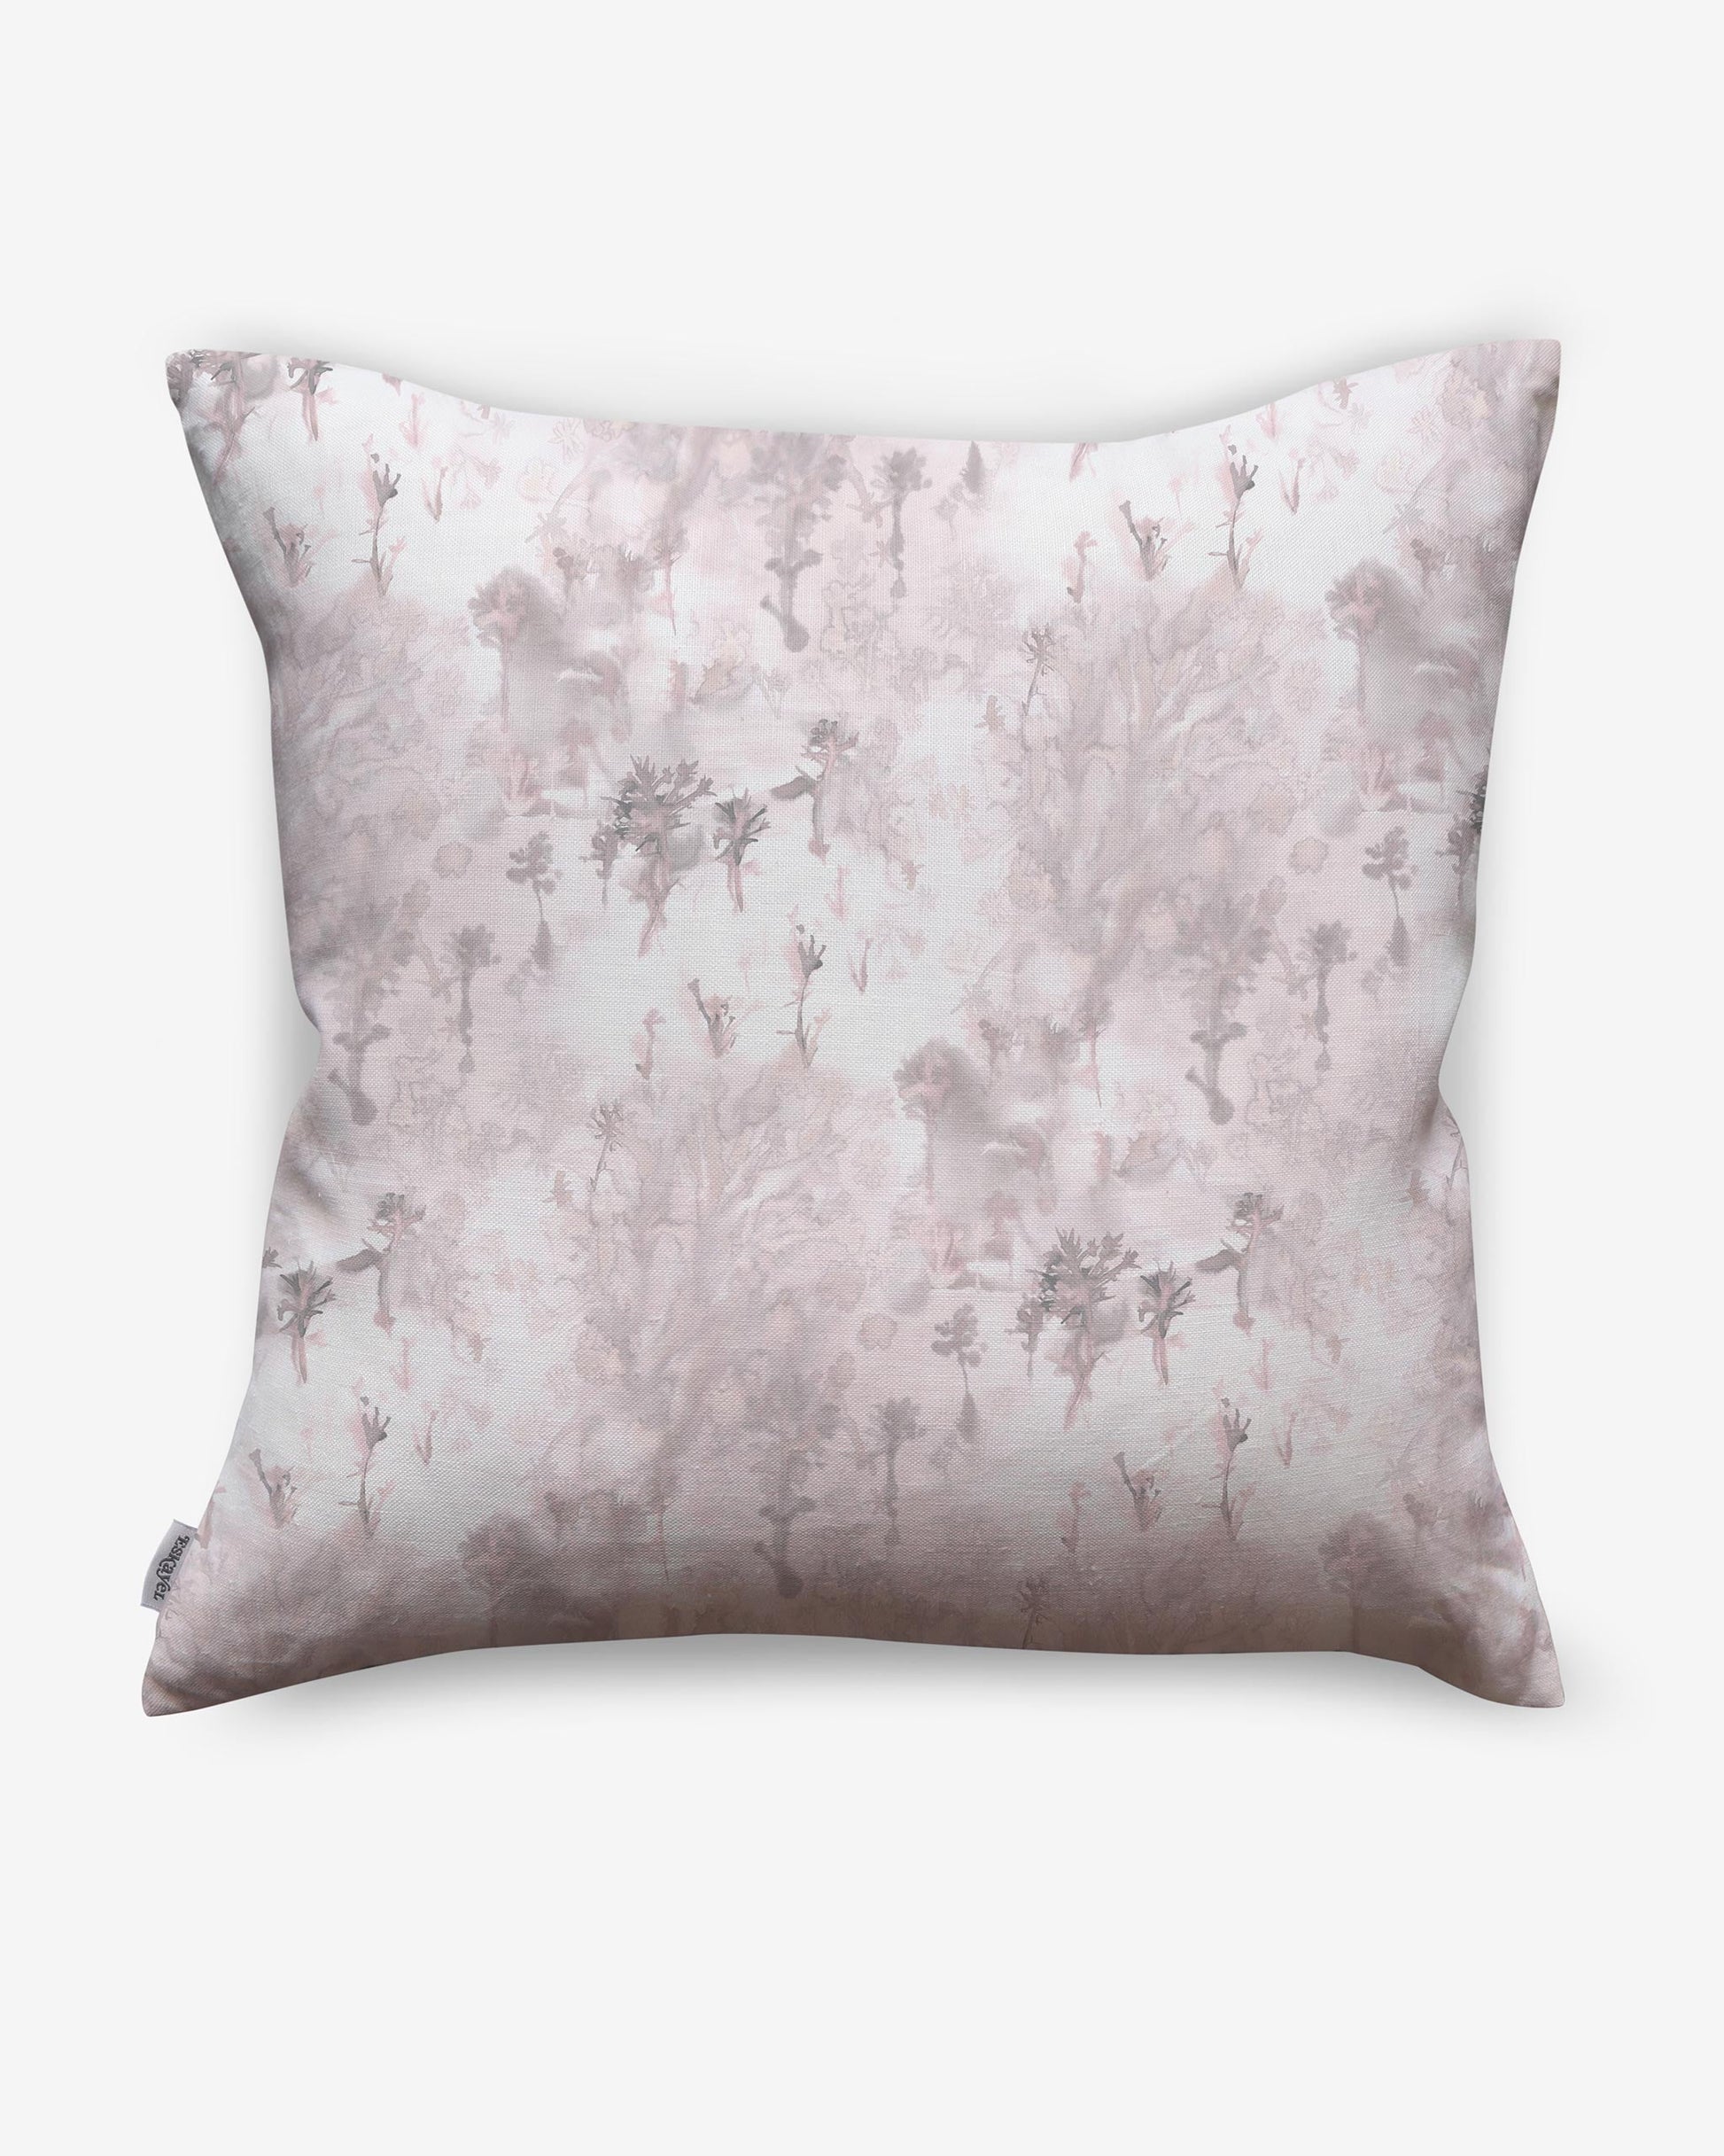 A Emvasia Pillow Alba luxury fabric pillow with a pink and white floral pattern